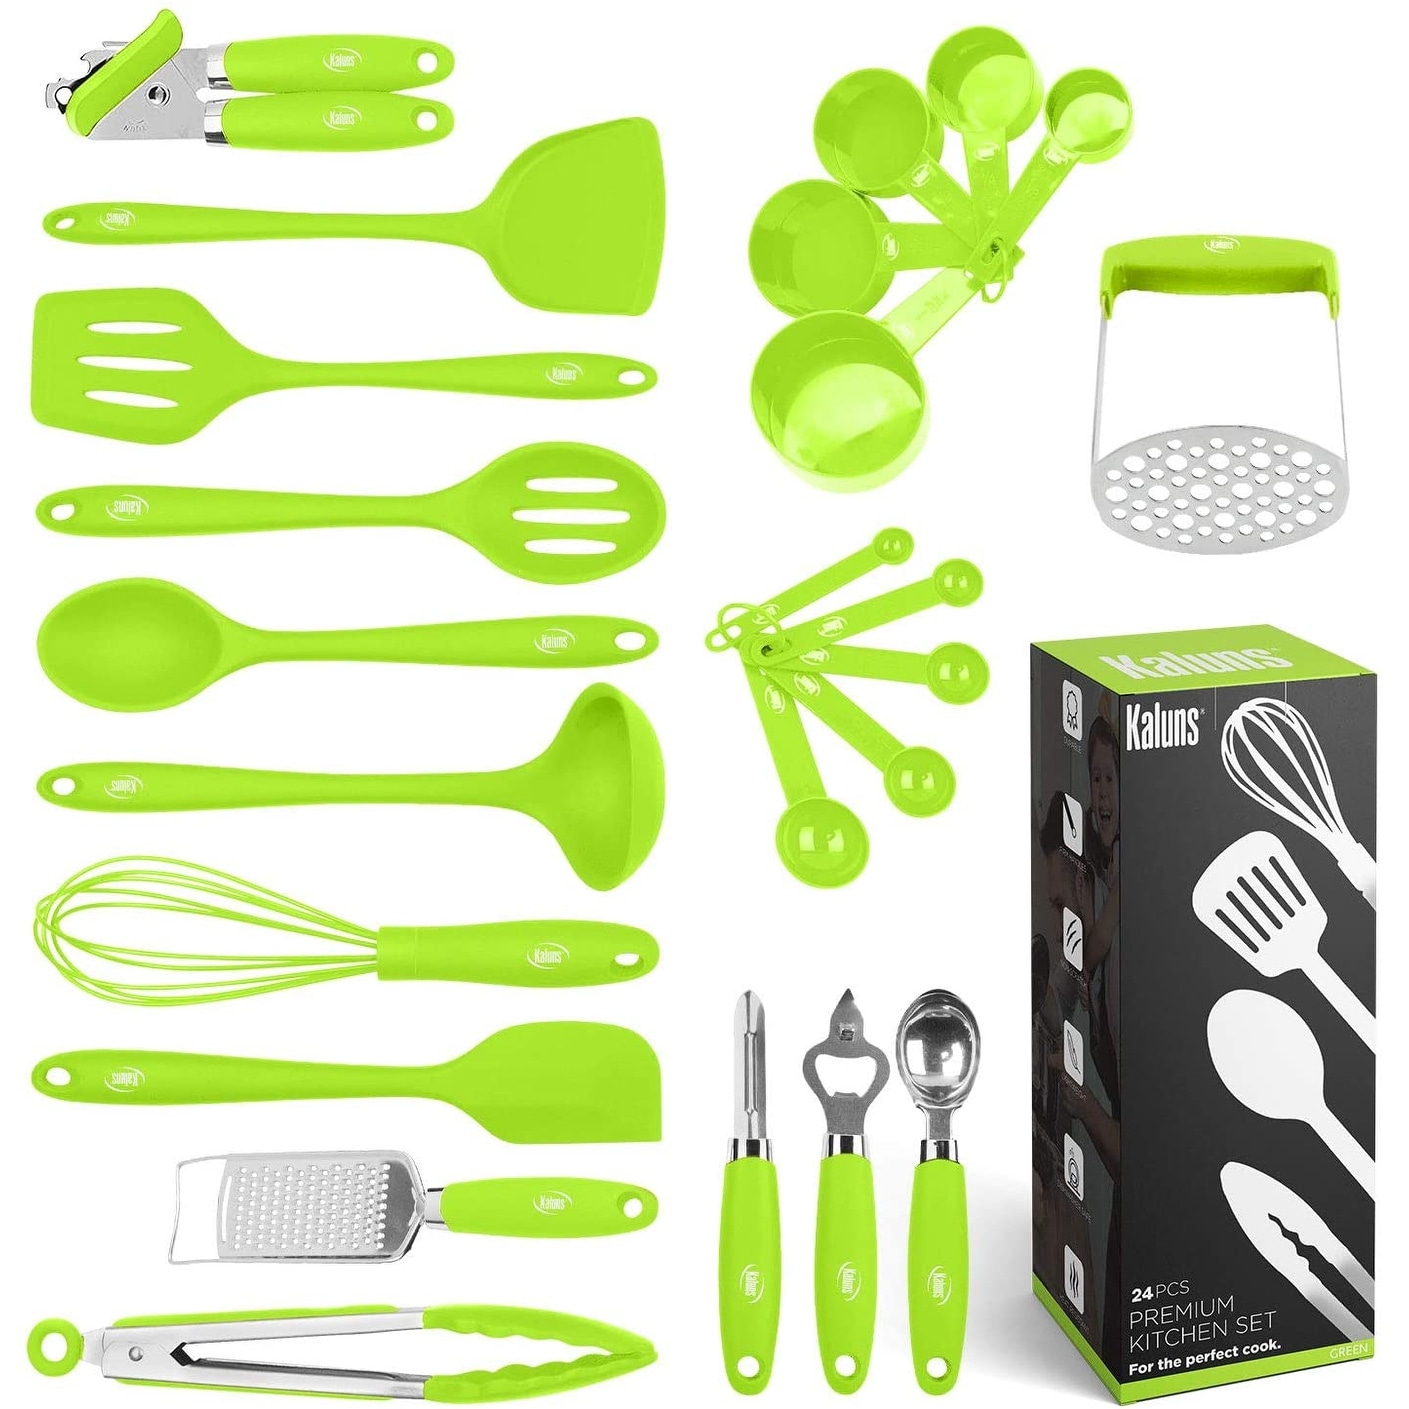 https://ak1.ostkcdn.com/images/products/is/images/direct/25b549882bd39e94b7592bdd7b0e77bbf8c4d2c5/Cooking-Utensils-Set%2C-24-Silicone-Kitchen-Utensils%2C-Non-Stick-and-Heat-Resistant-Kitchen-Tools%2C-Useful-Cooking-Gadgets.jpg